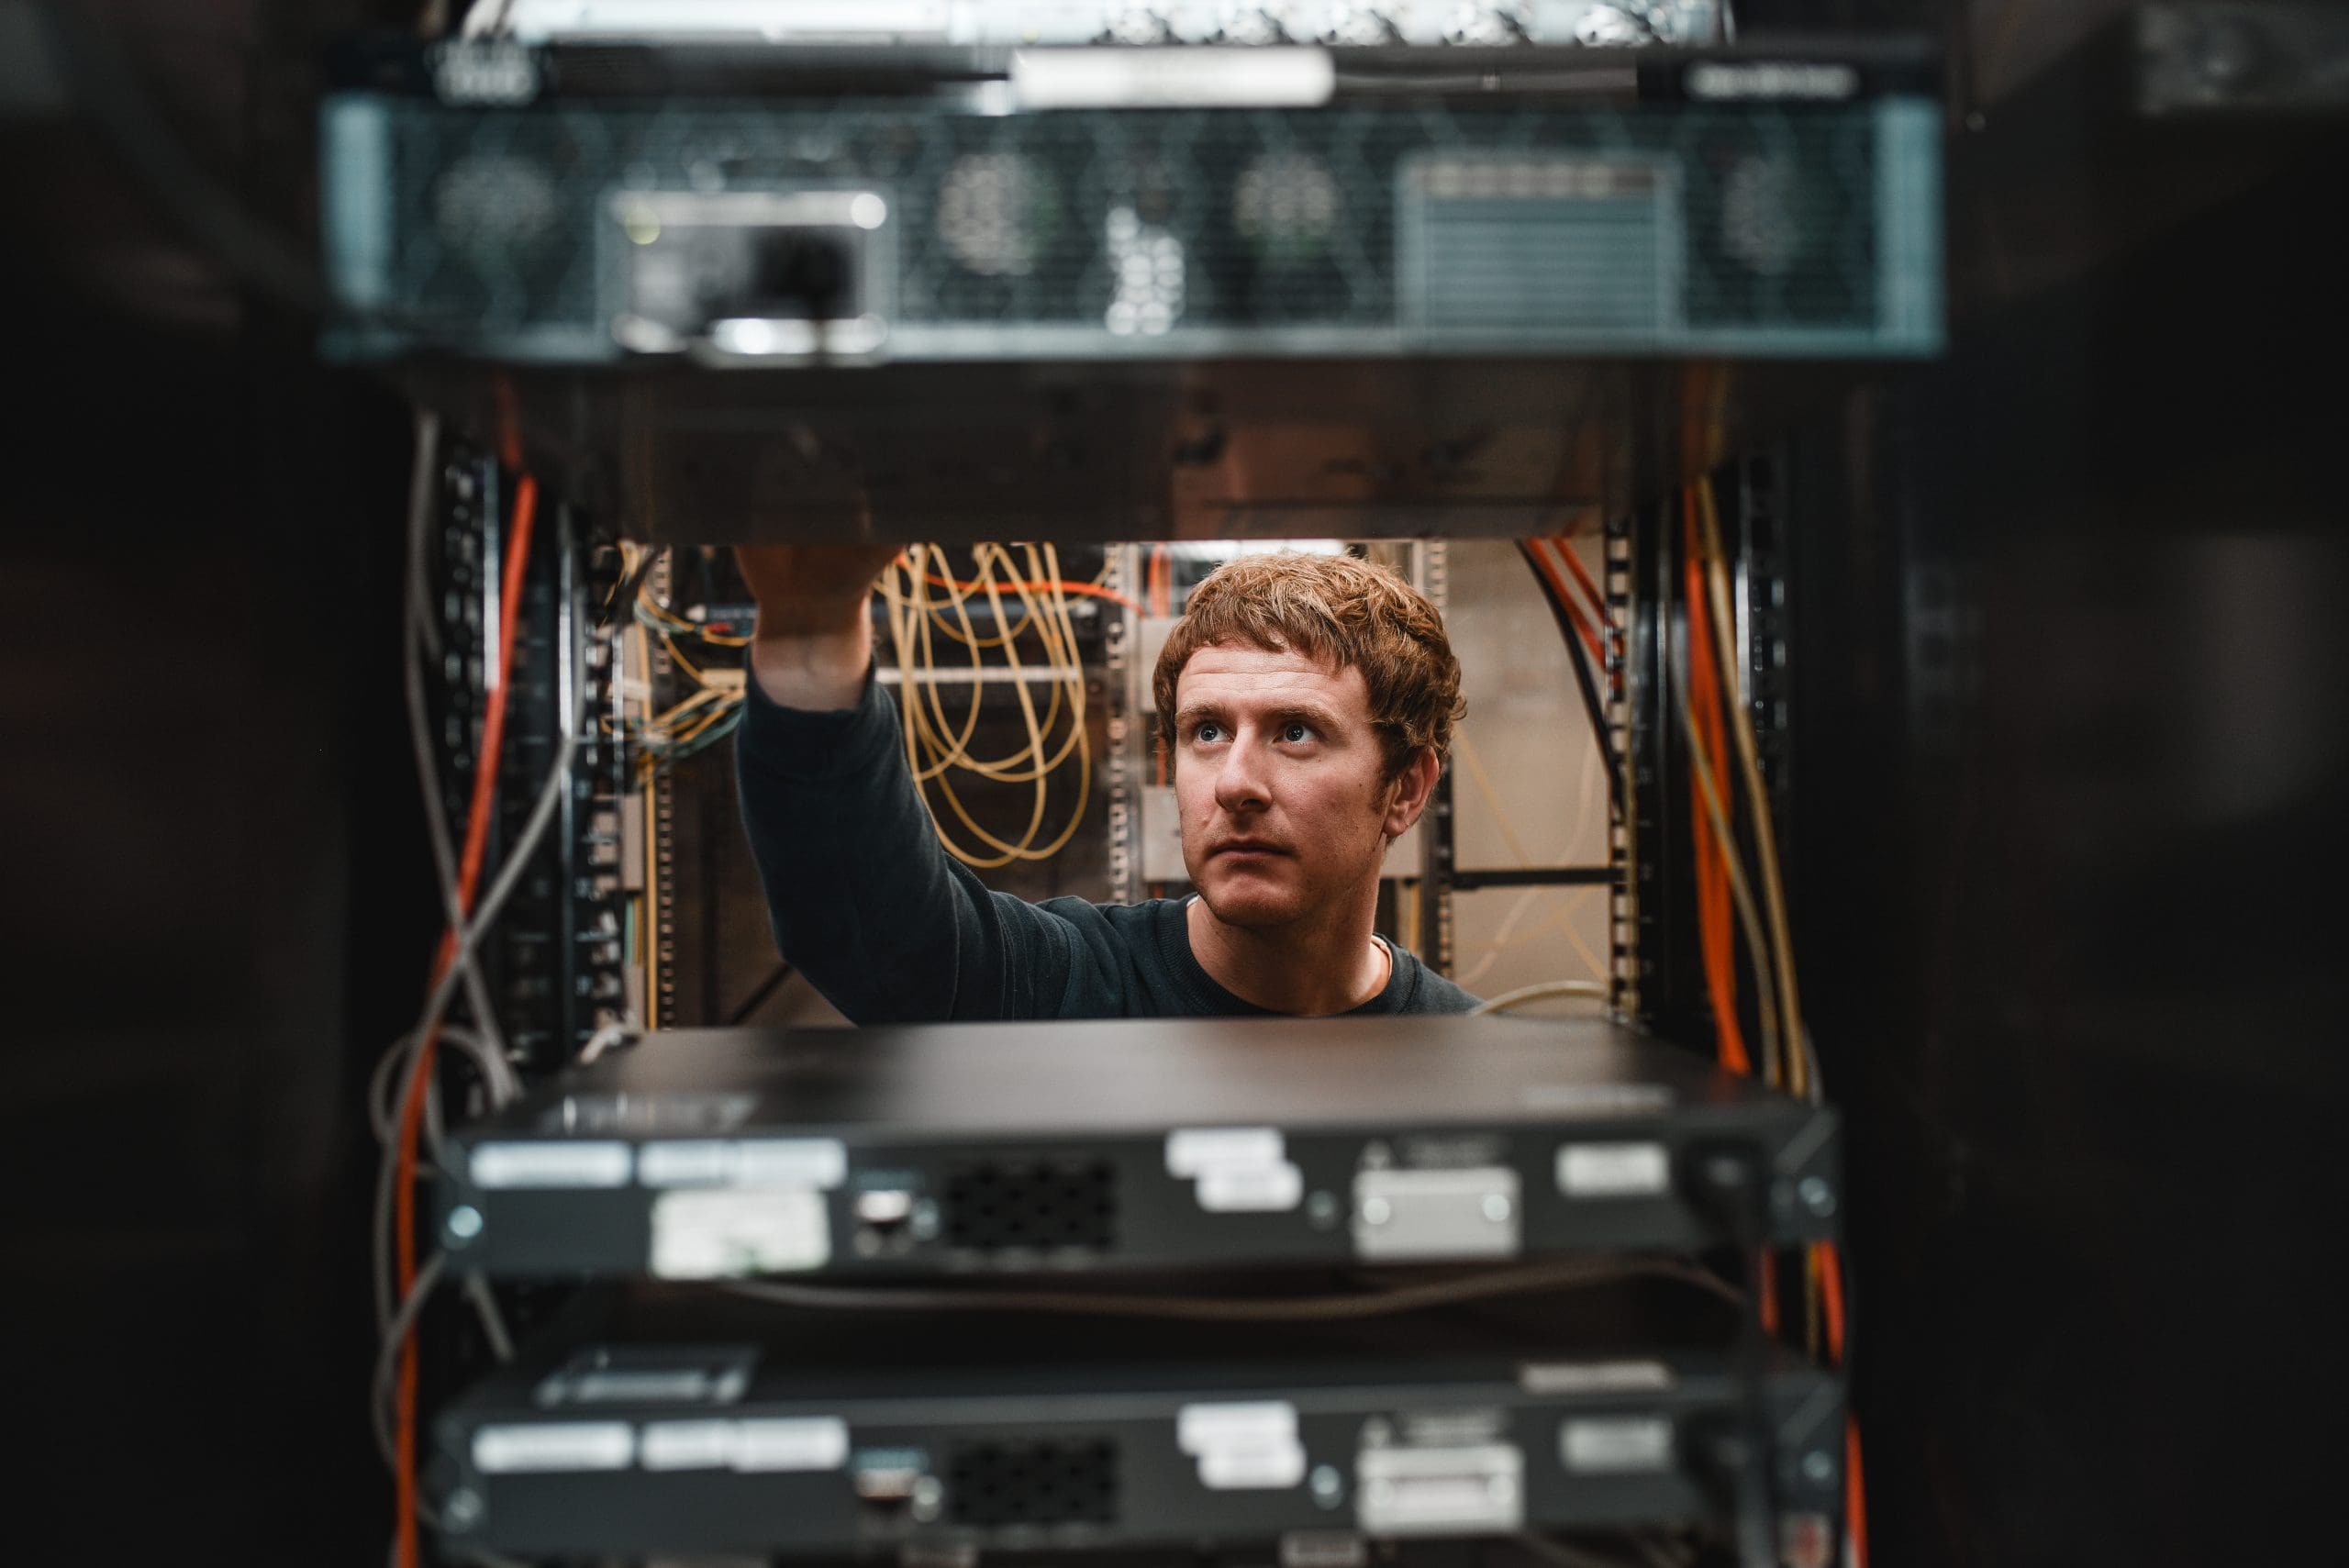 Photograph taken of Cantium employee through a server rack while they are performing maintenance and routine checks.